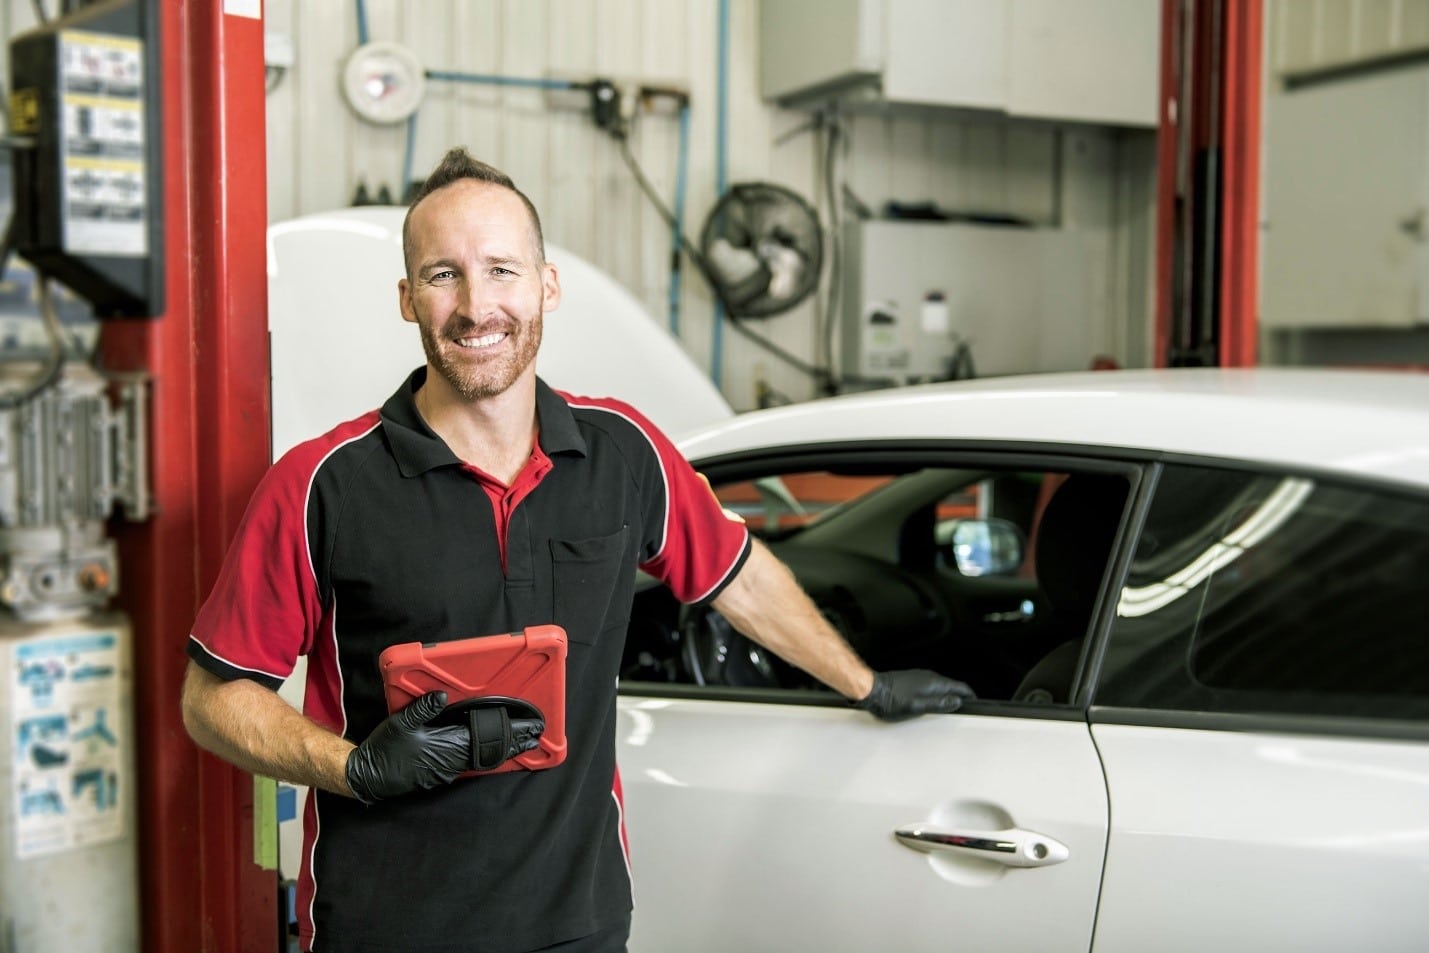 Ask Us About Automotive Repair Equipment Financing